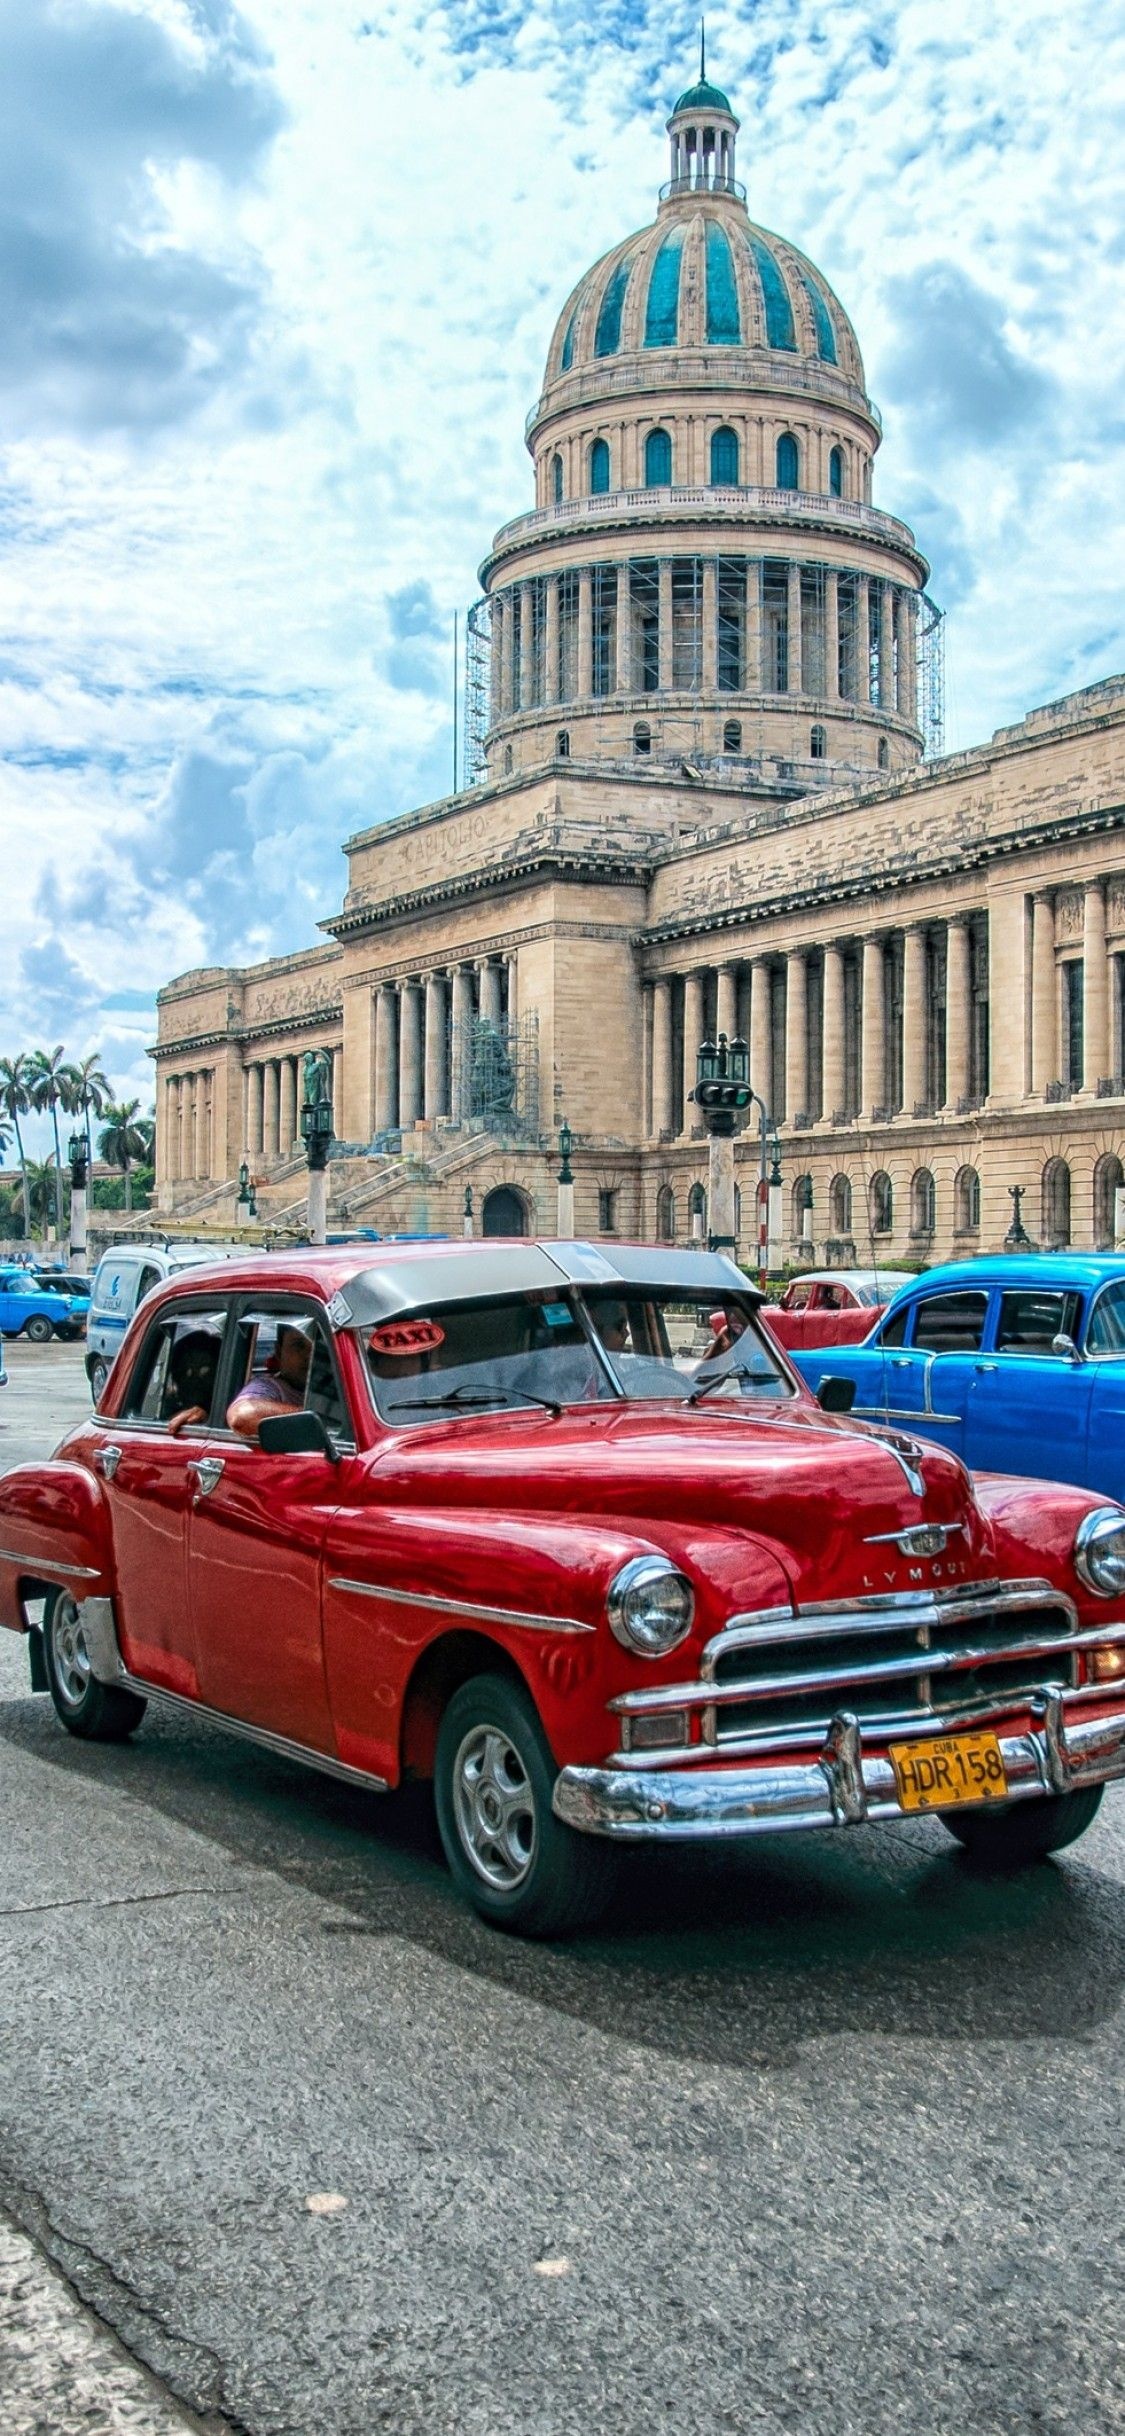 Cuba iPhone wallpapers, Tropical charm, Digital delight, Phone background, 1130x2440 HD Handy